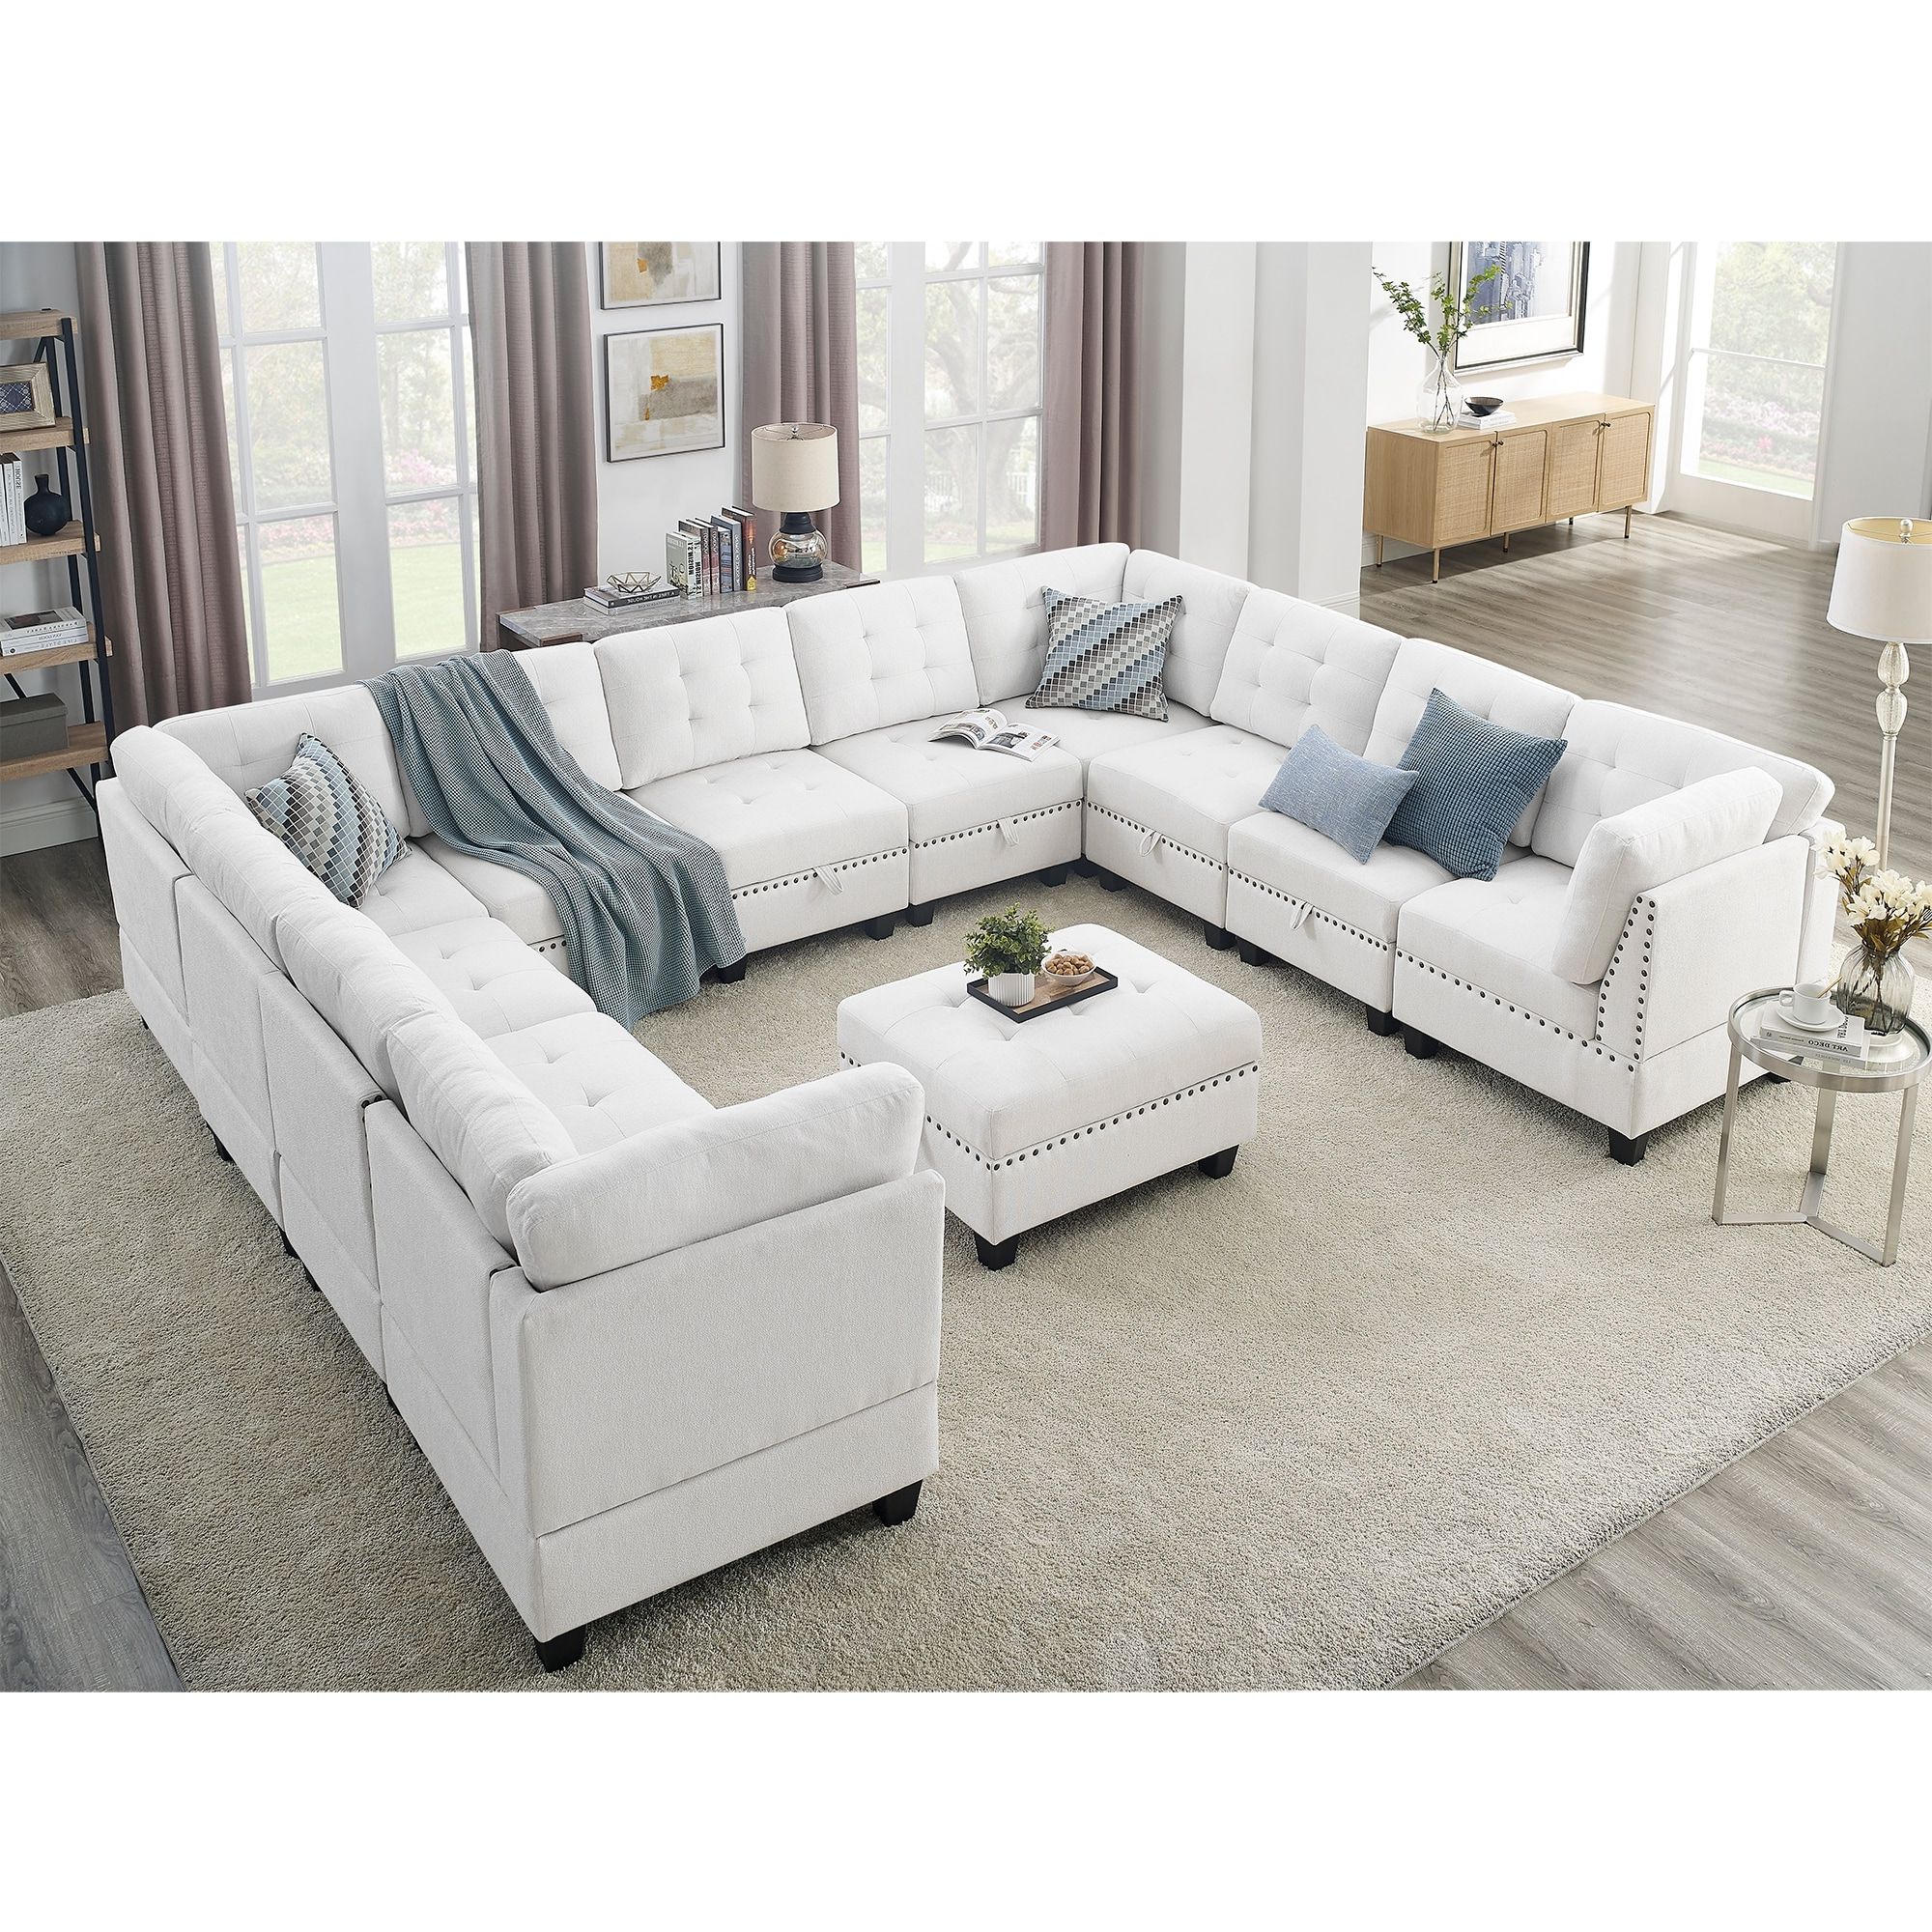 Chenille U Shaped Modular Sectional Sofa With Bonus Storage – On Sale – –  37703946 With Regard To U Shaped Modular Sectional Sofas (View 8 of 20)